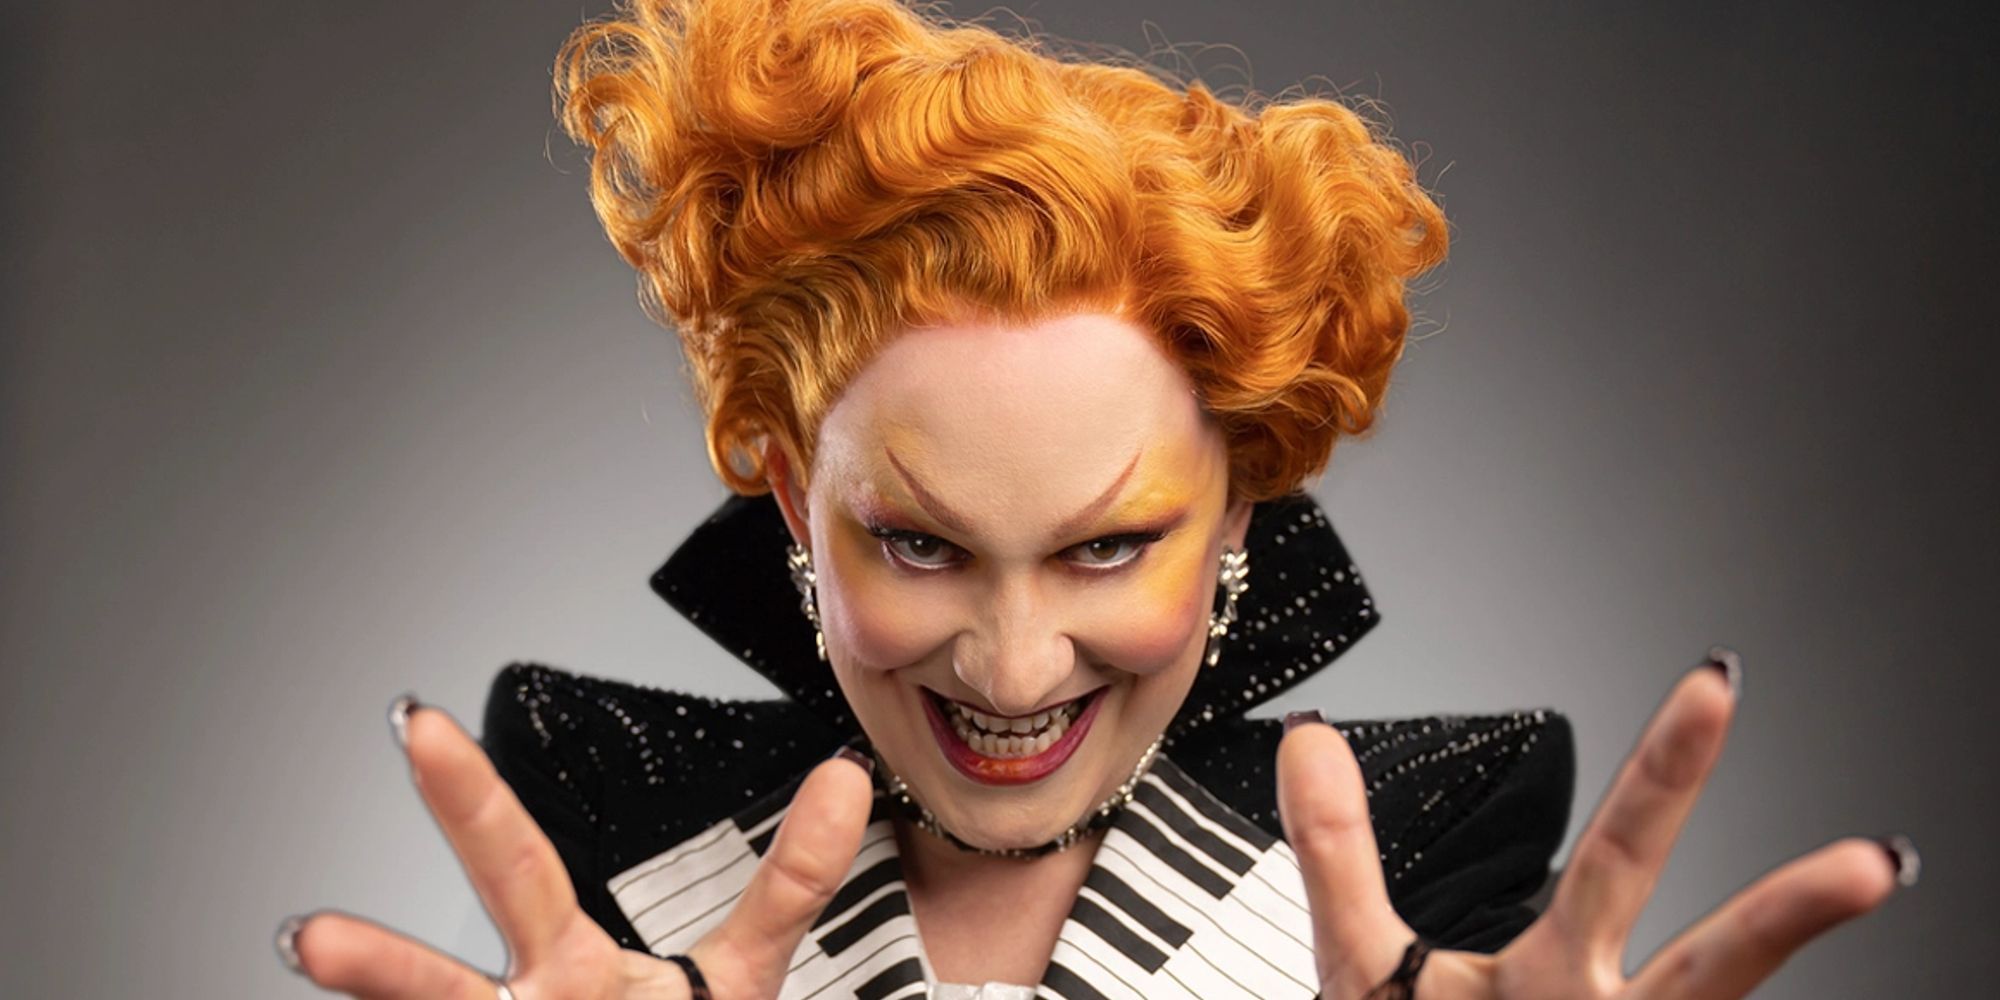 Jinkx Monsoon In a piano-style costume in Doctor Who season 14.